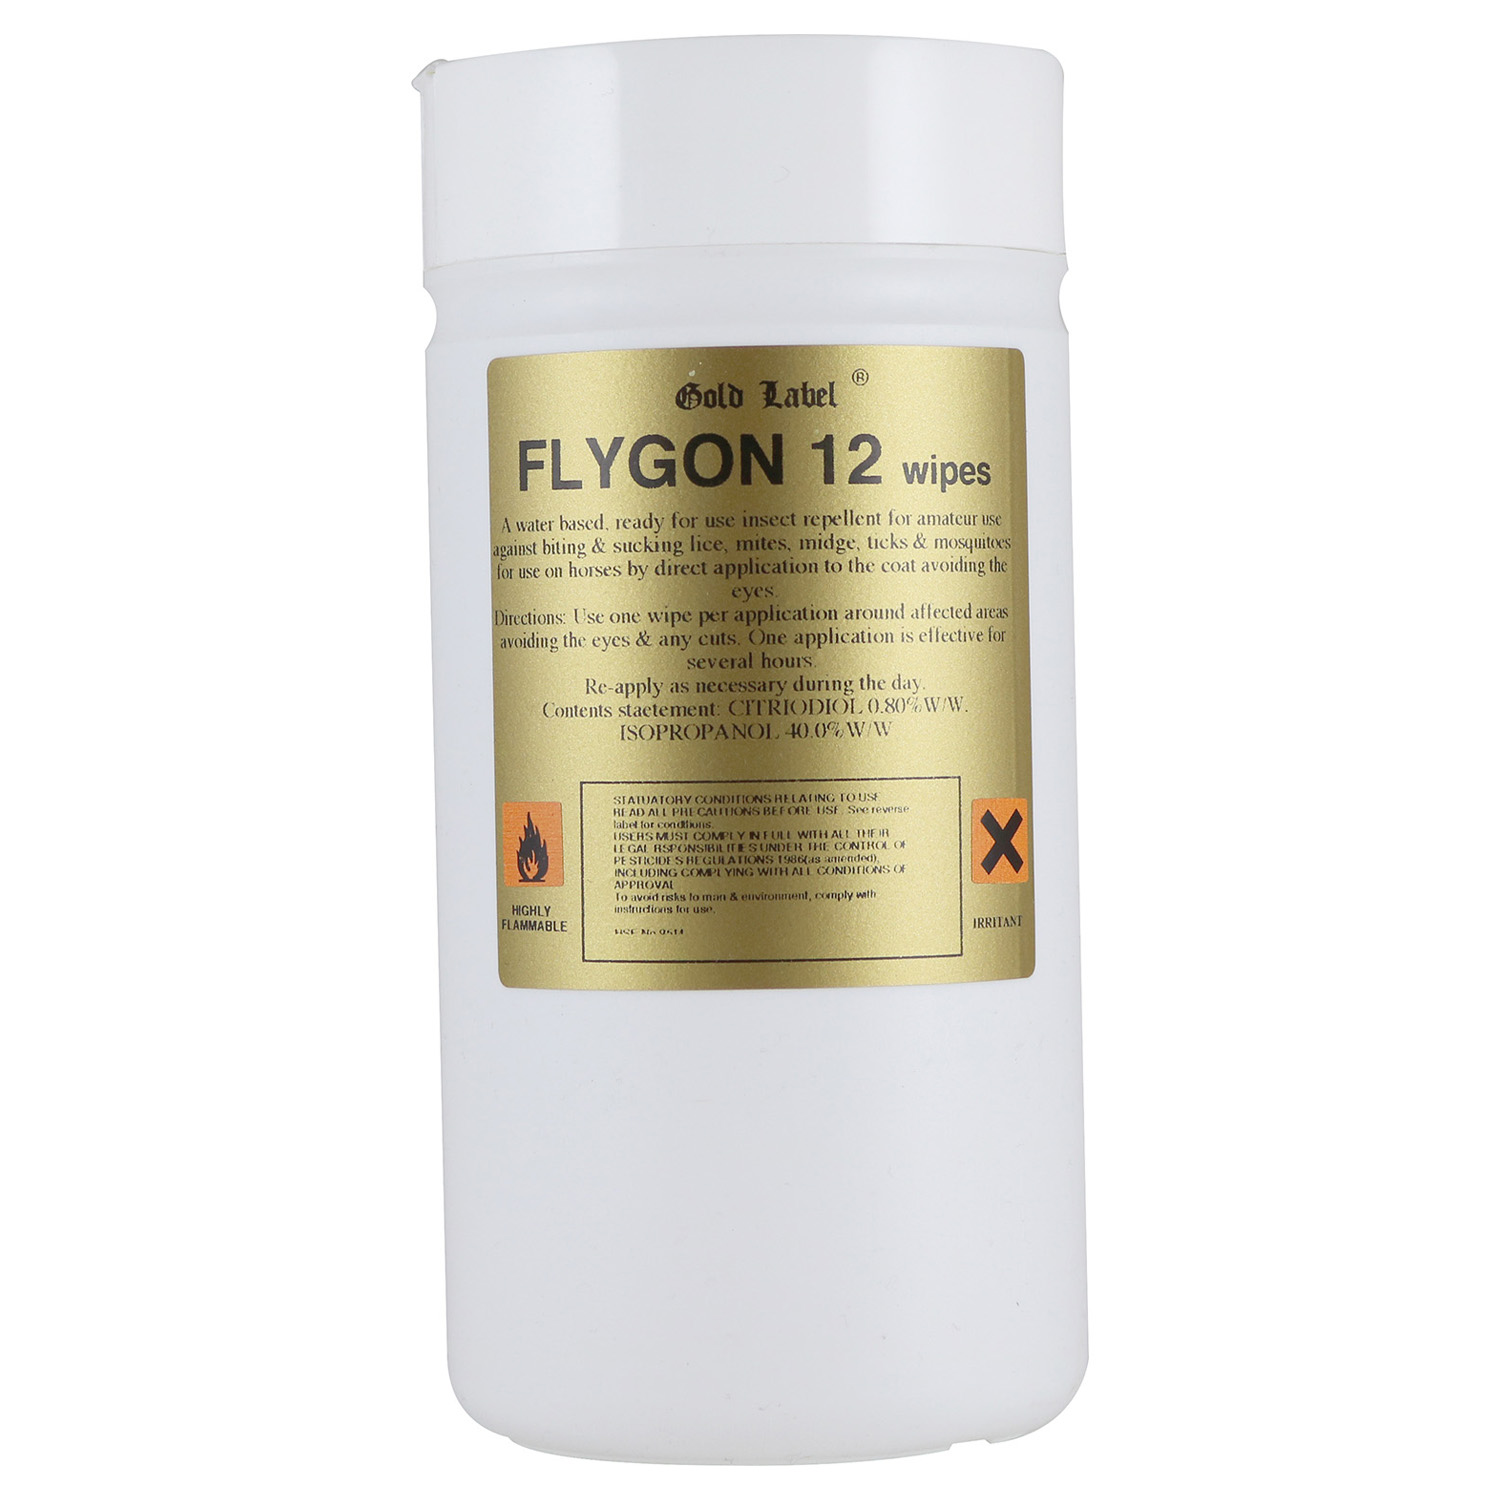 GOLD LABEL FLYGON 12 WIPES 100 WIPES 100 PACK